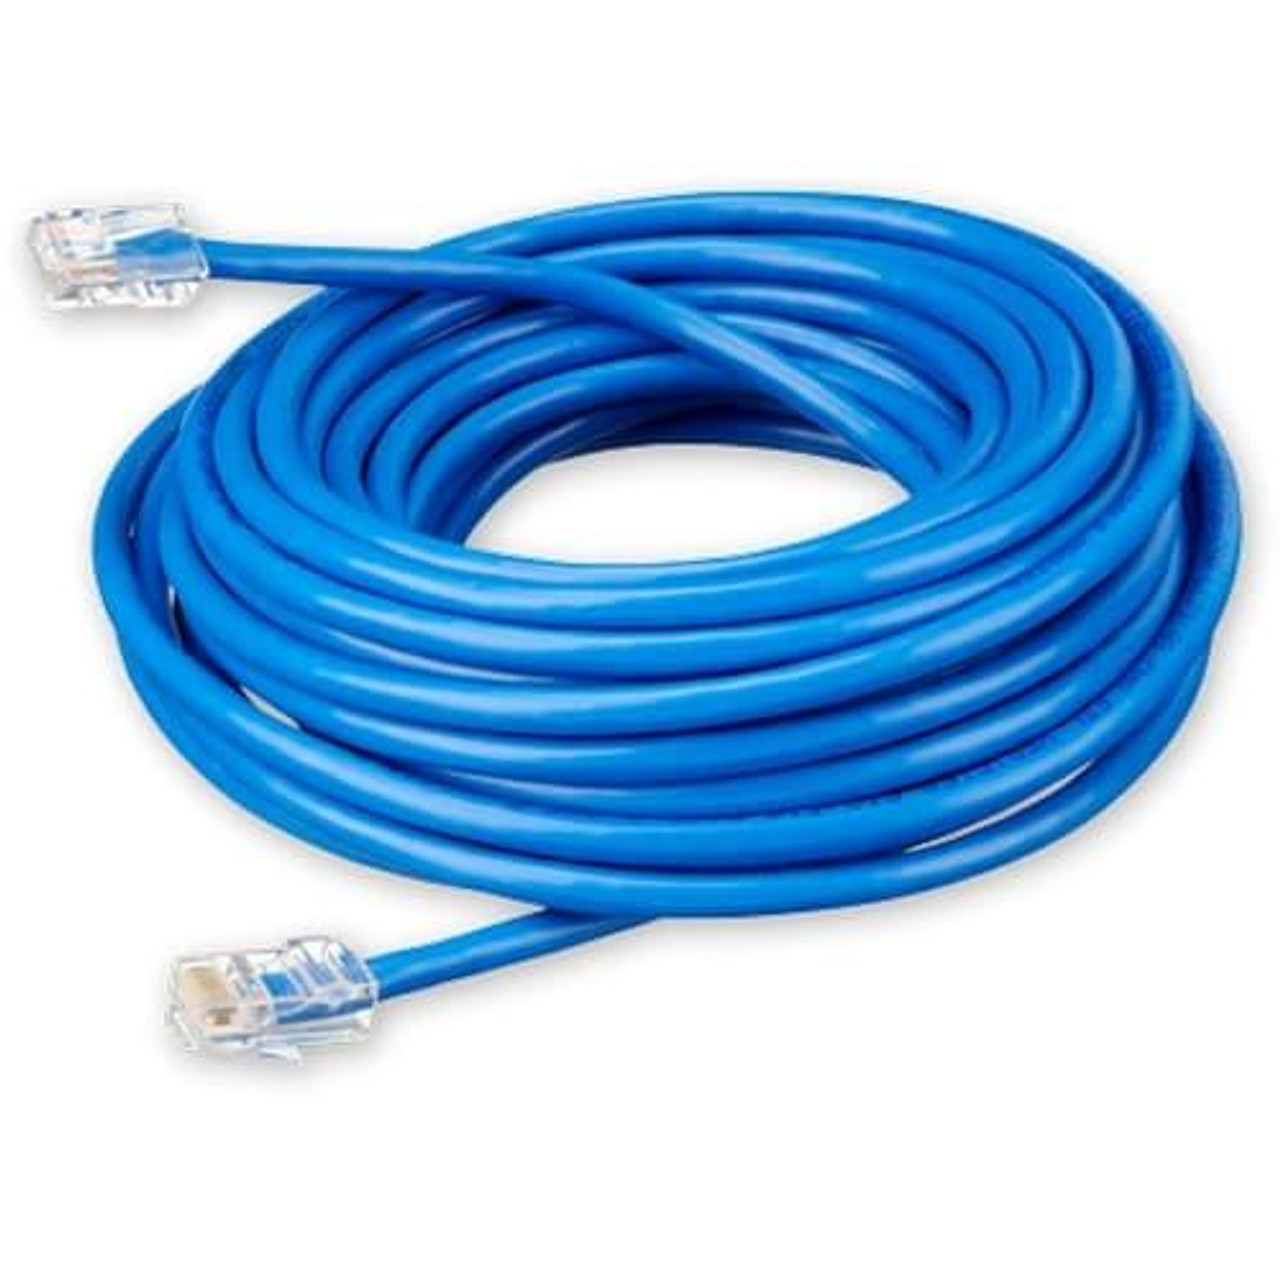 Victron Energy RJ45 UTP CABLE 10 M ASS030065010